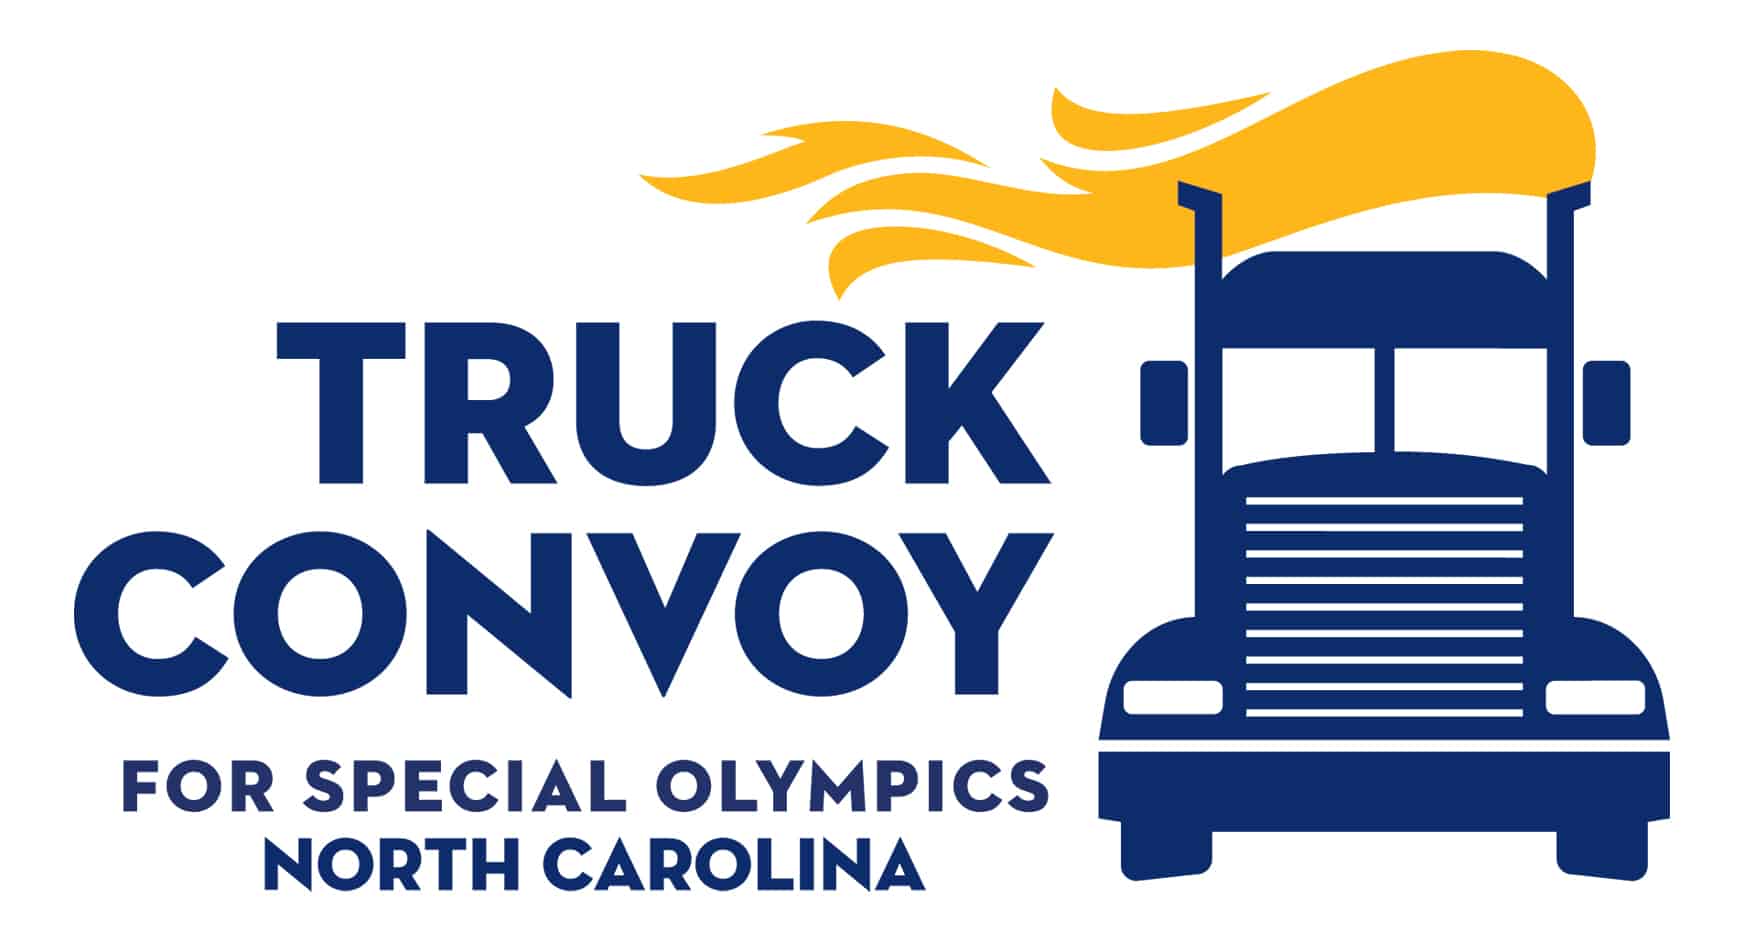 2019 Truck Convoy for Special Olympics North Carolina Campaign